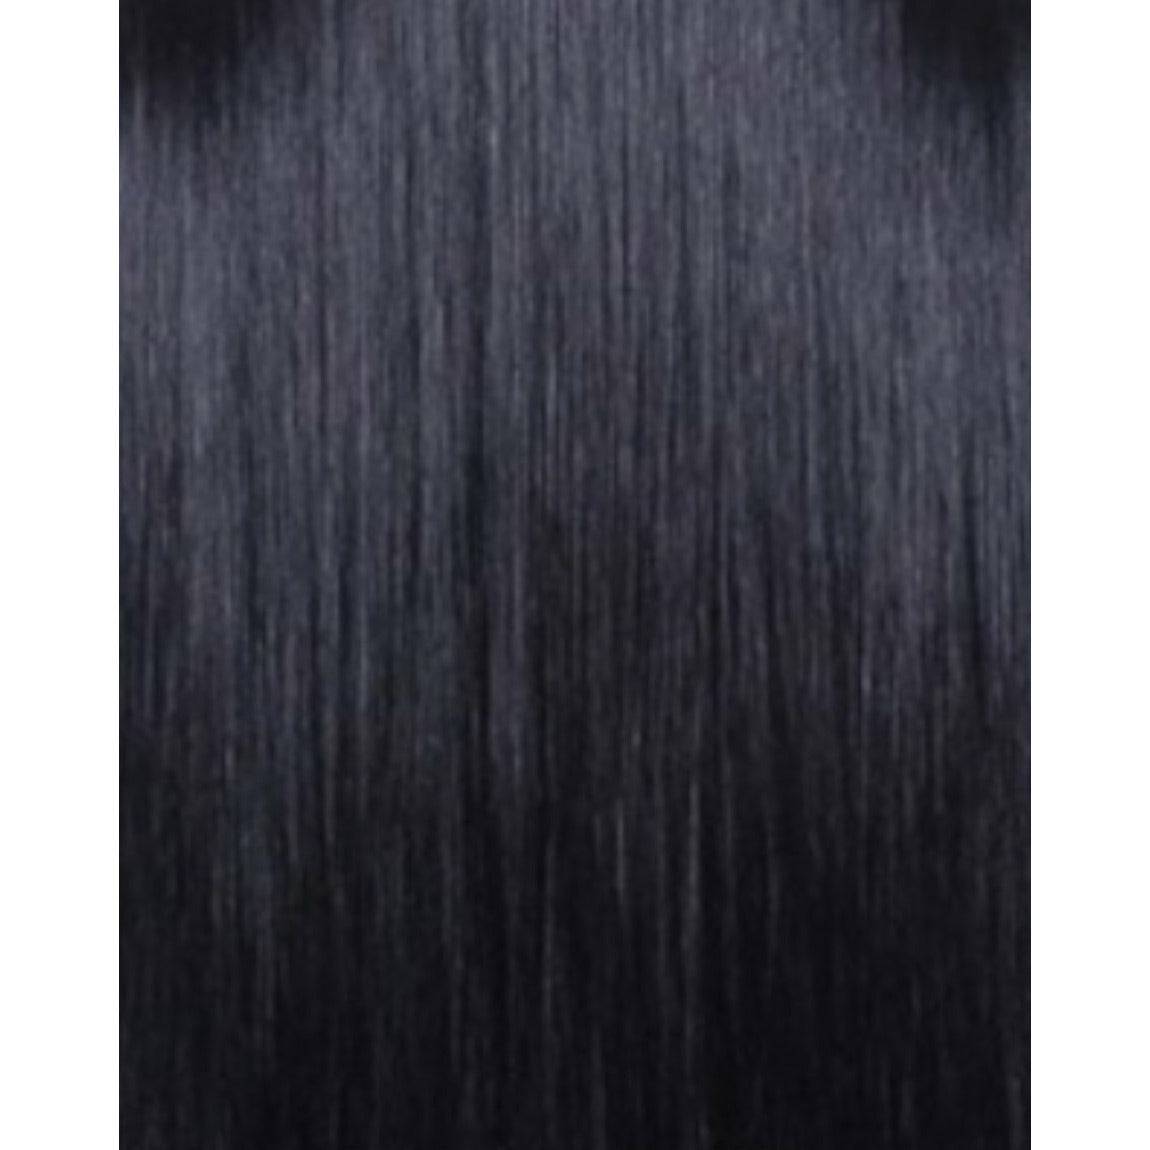 Unique's Human Hair Perm Straight 14 Inch - VIP Extensions